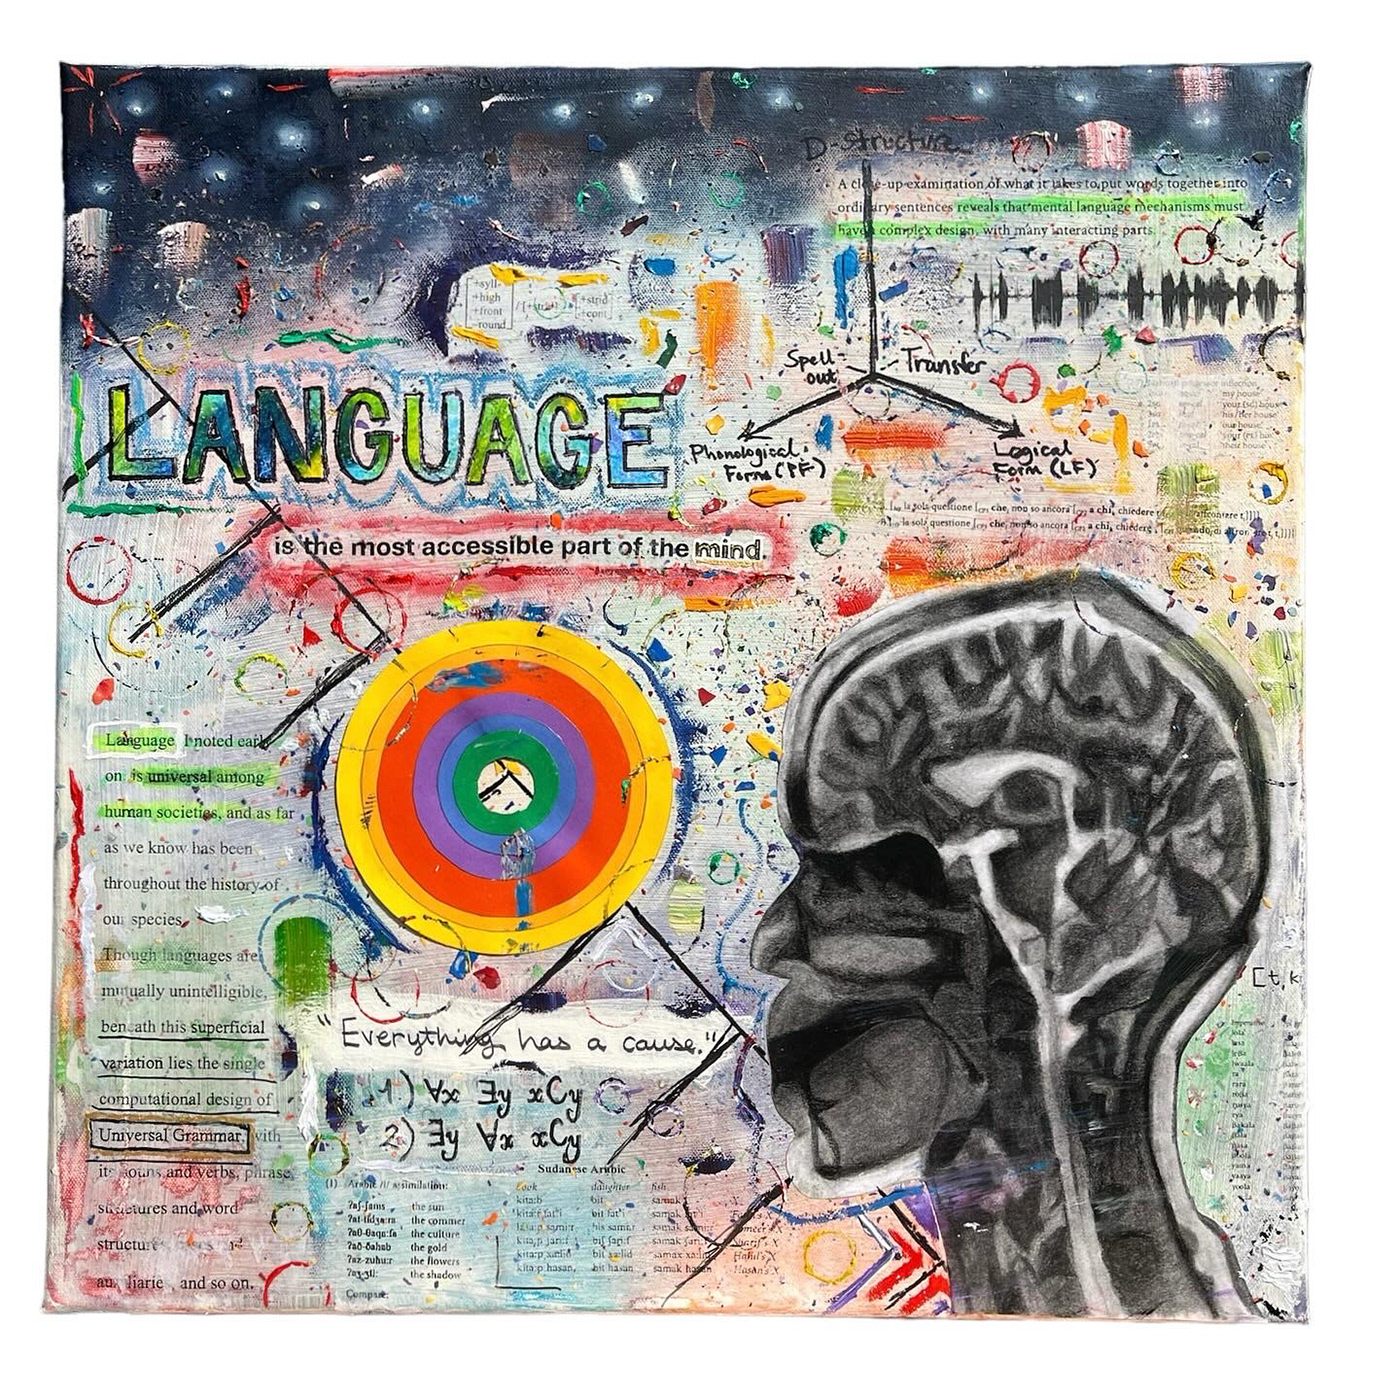 mixed media collage linguistics Acrylic paint charcoal Quotes image transfer oil paint